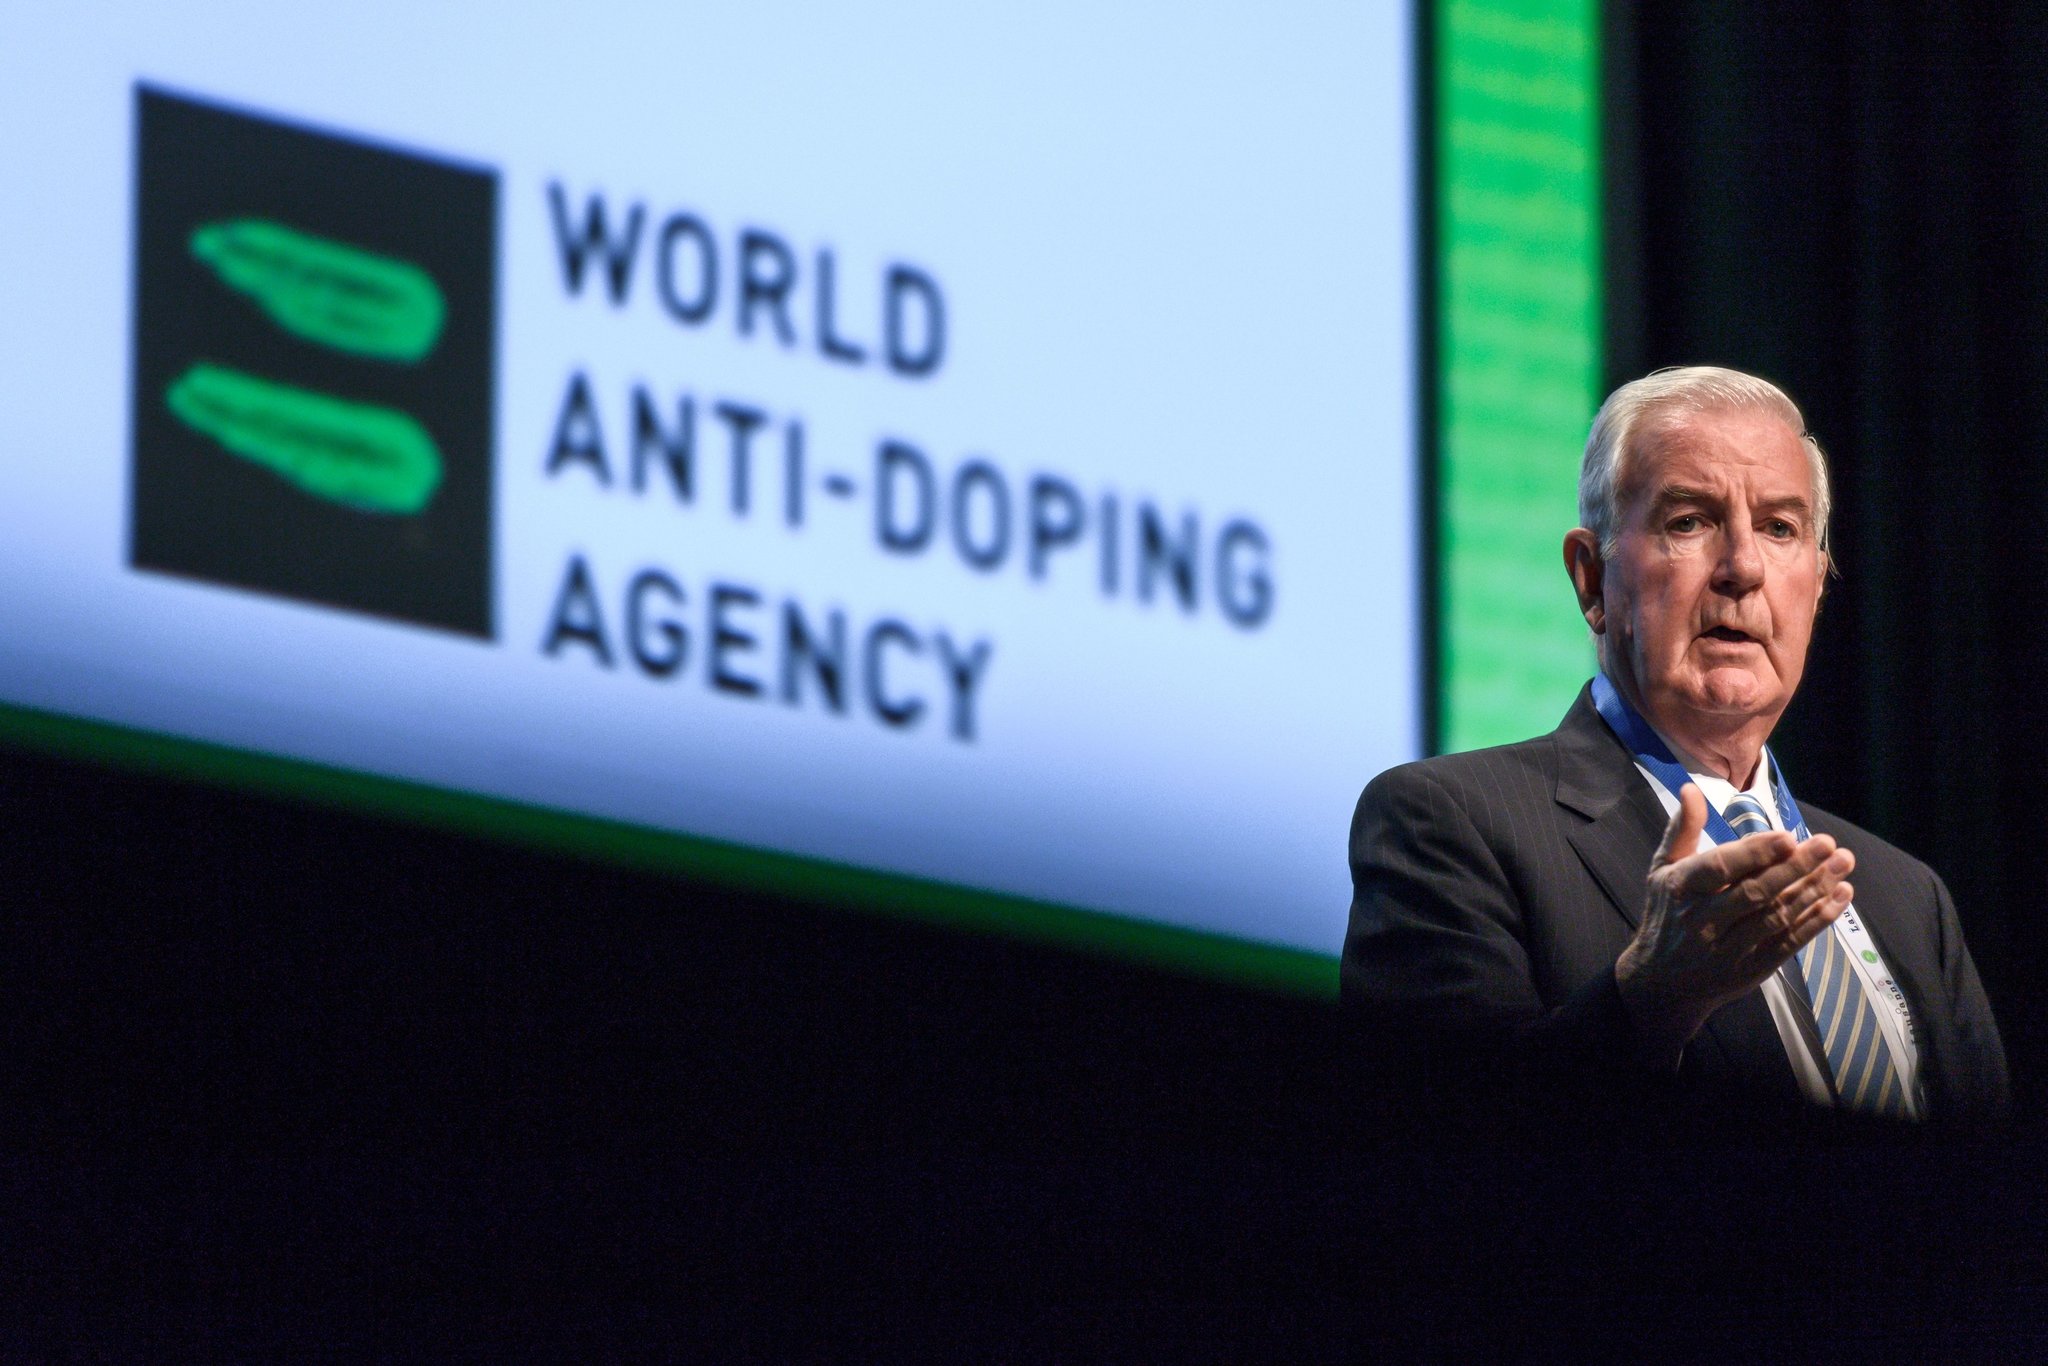 World Anti-Doping Agency To Keep Cannabis On Banned Substance List